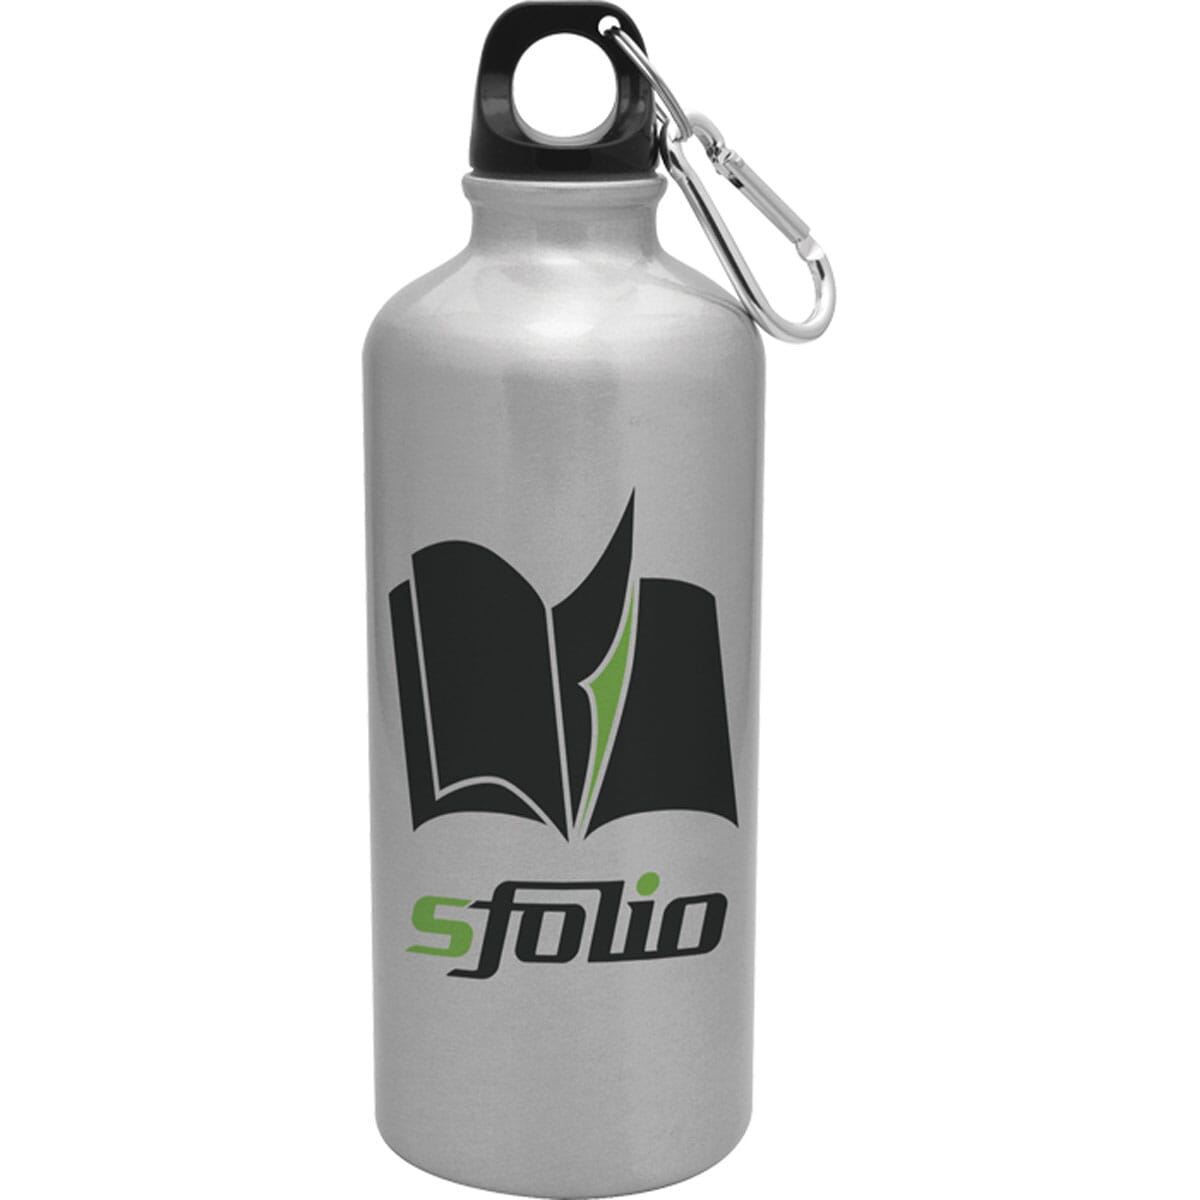 Silver aluminum water bottle with black lid, silver carabiner clip and a black and green logo